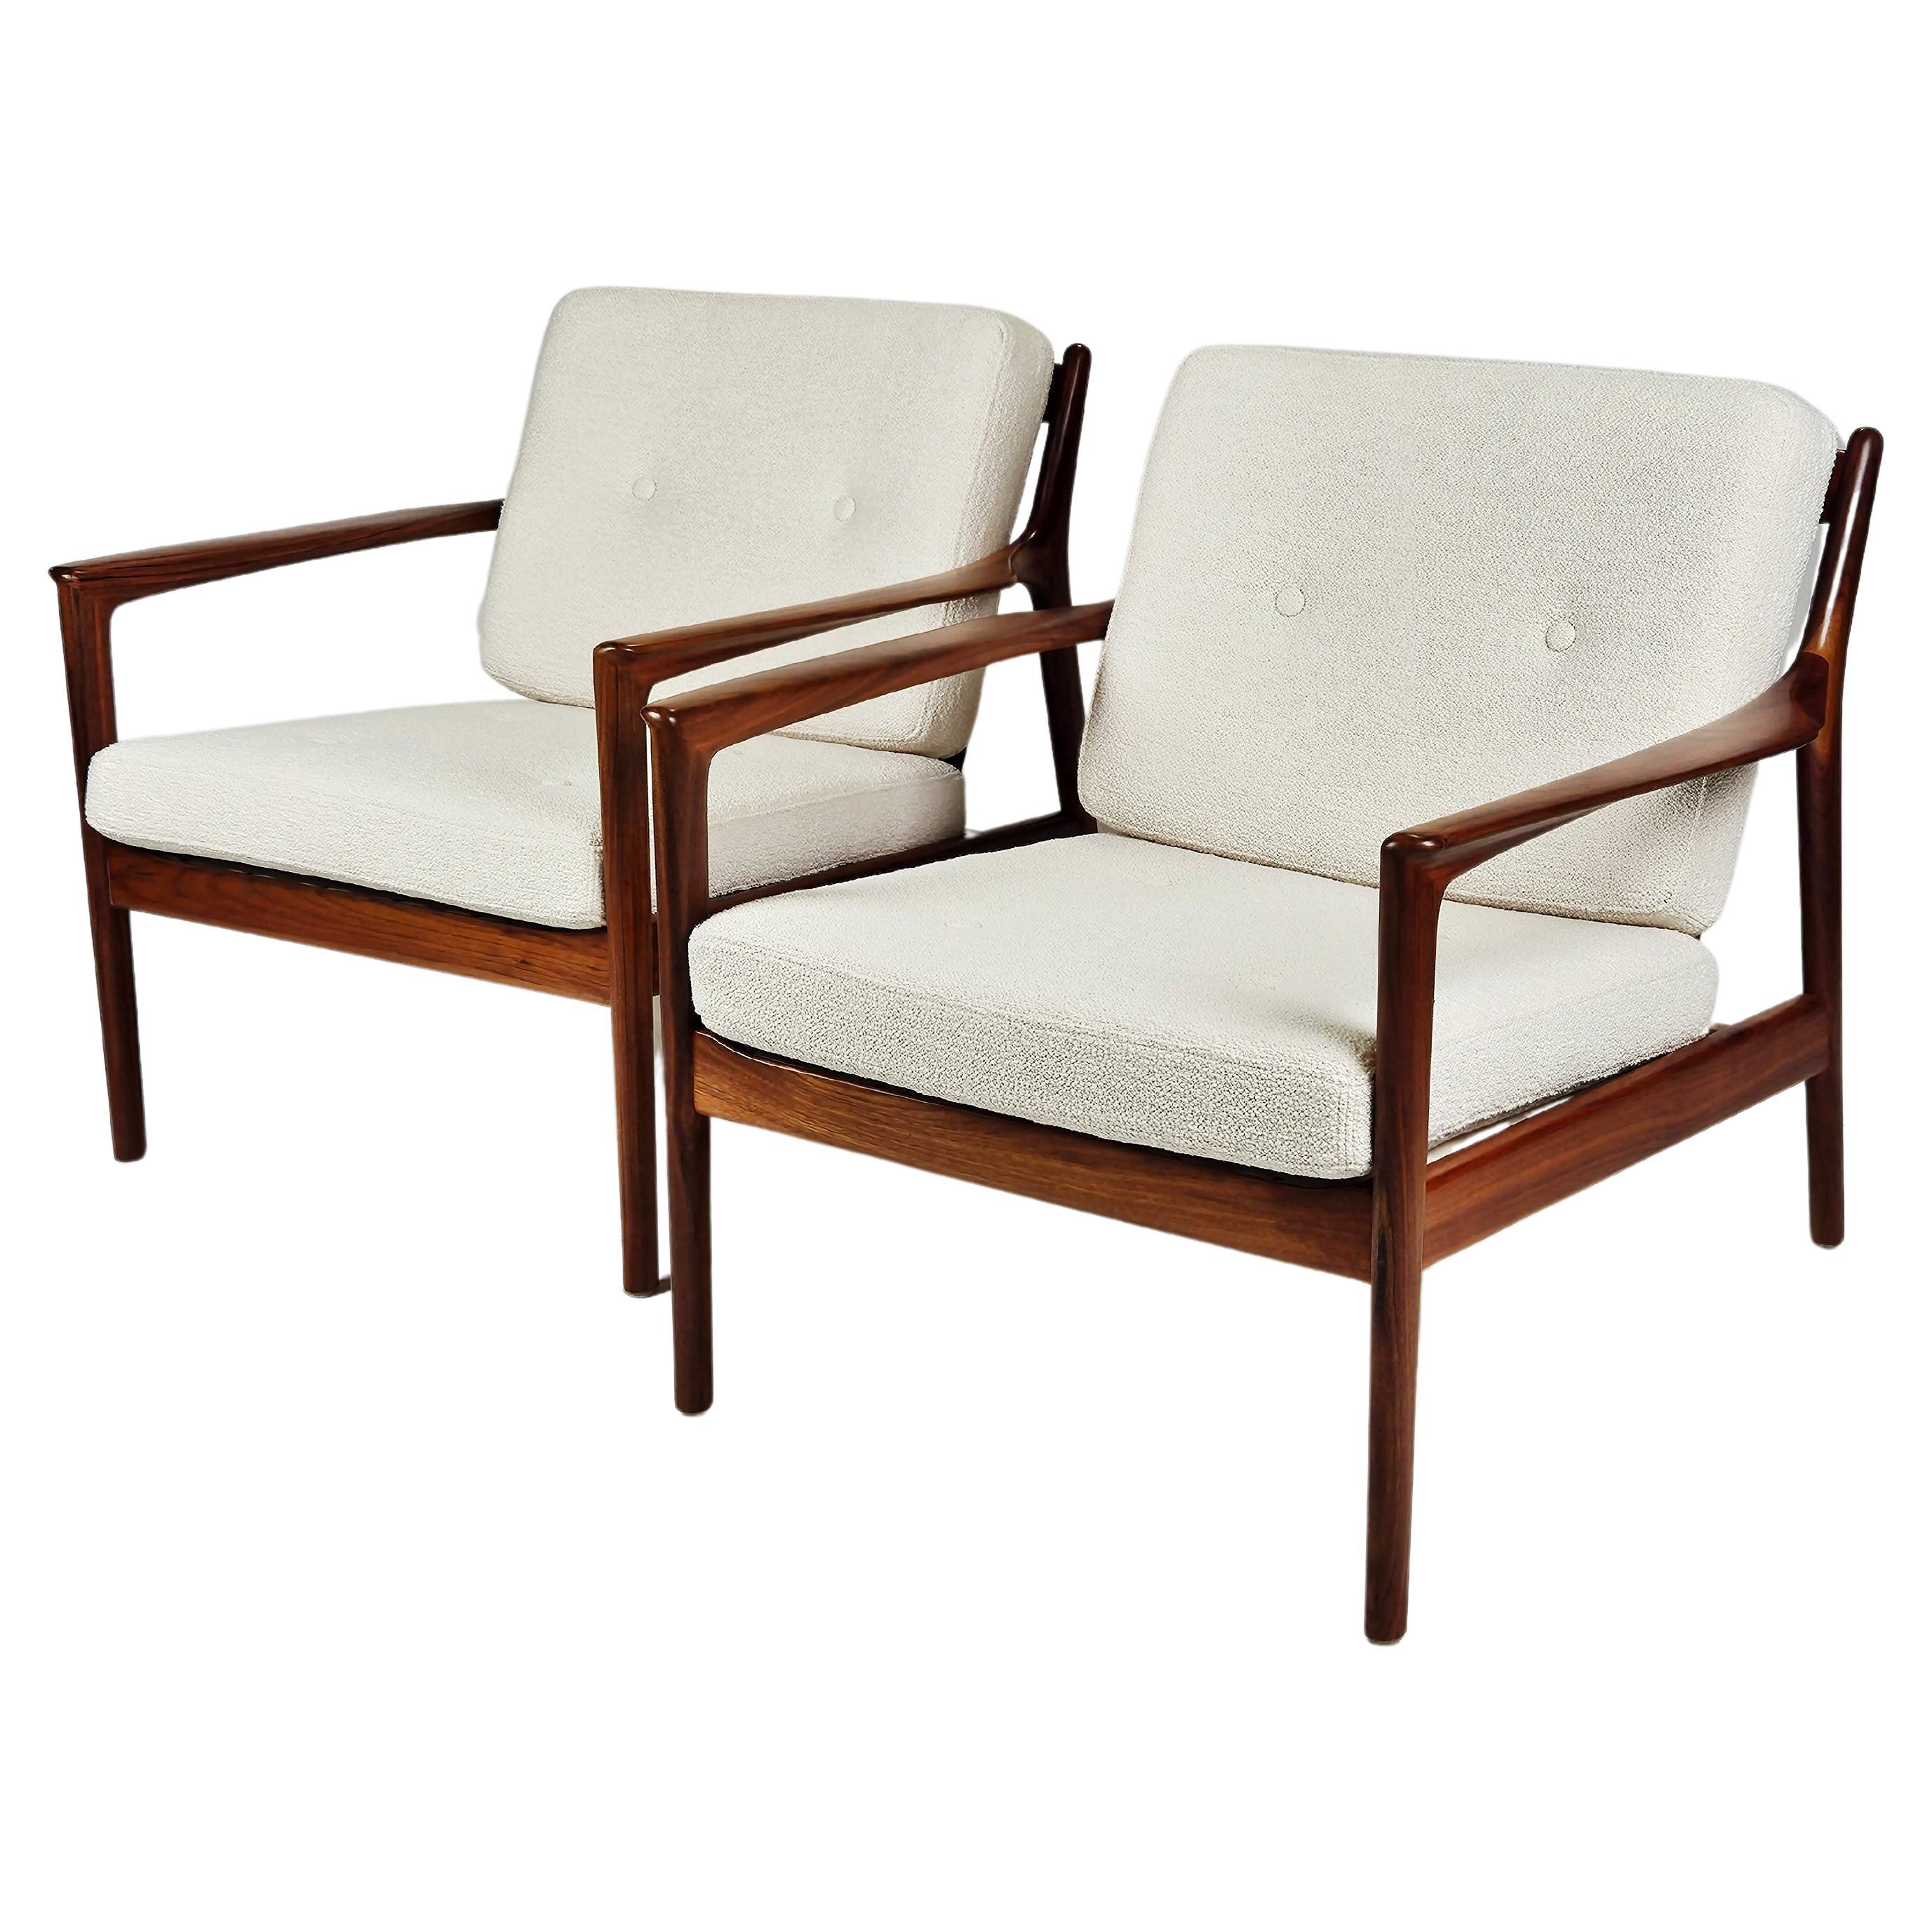 Lounge chairs by Folke Ohlsson for DUX, Sweden, 1960s For Sale